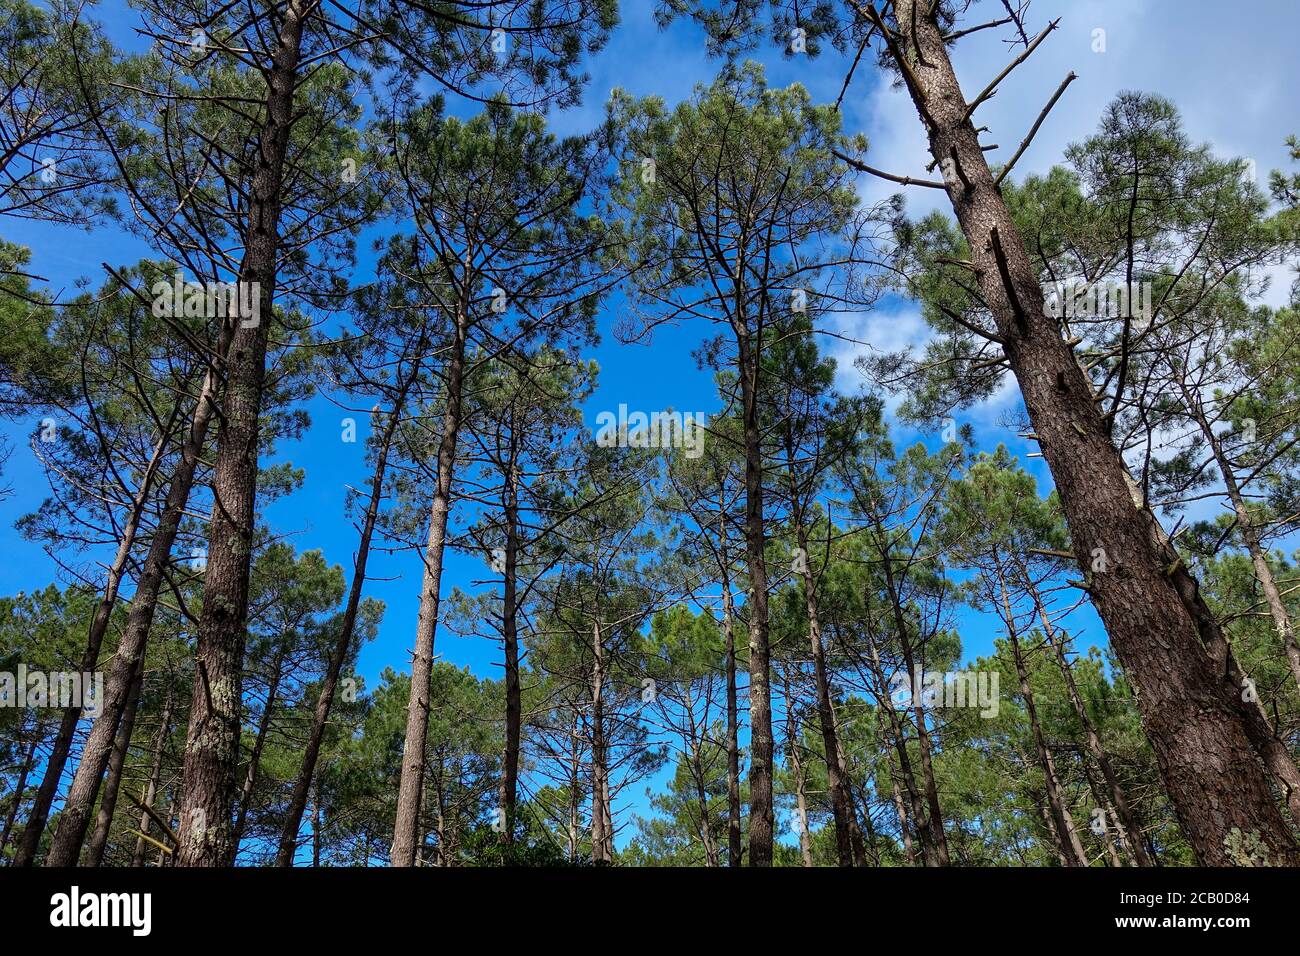 Pine wood trees on a plantaion in a forest near Bordeaux under blue sky. Stock Photo